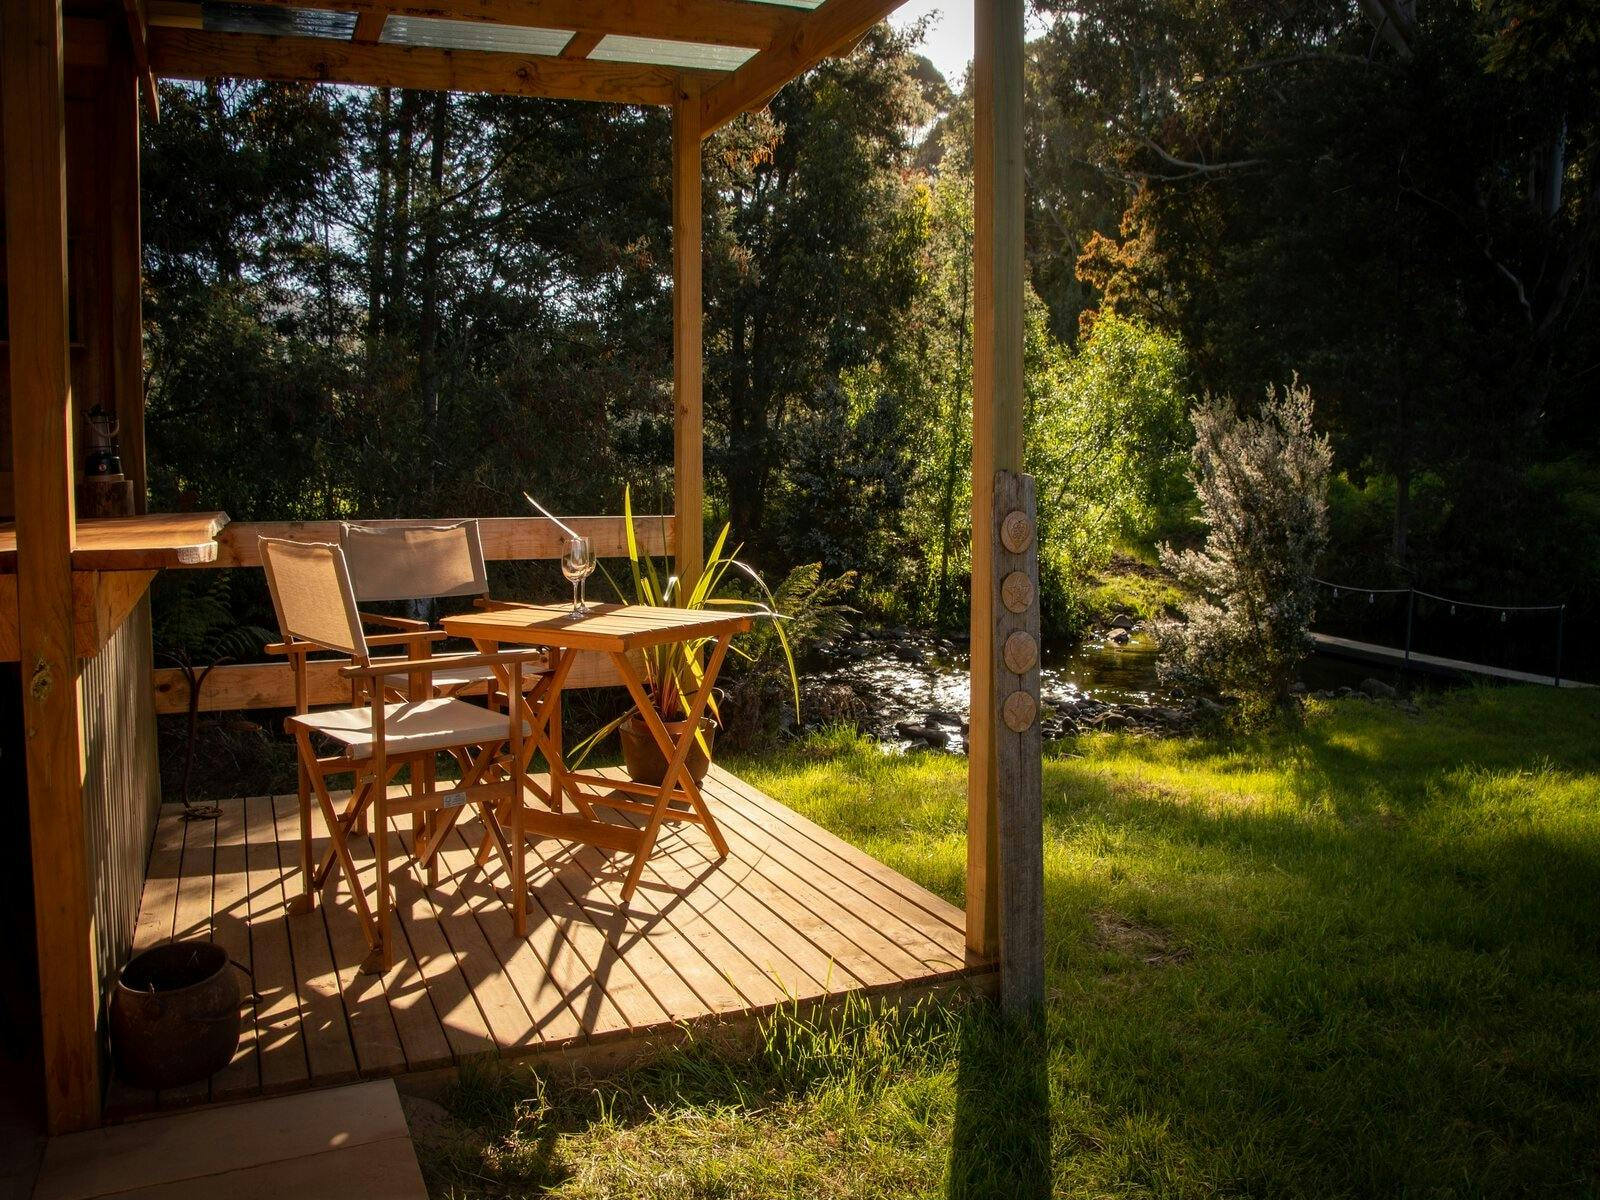 A deck area off the kitchen hut with  small table and 2 camp chairs. The deck overlooks the stream.